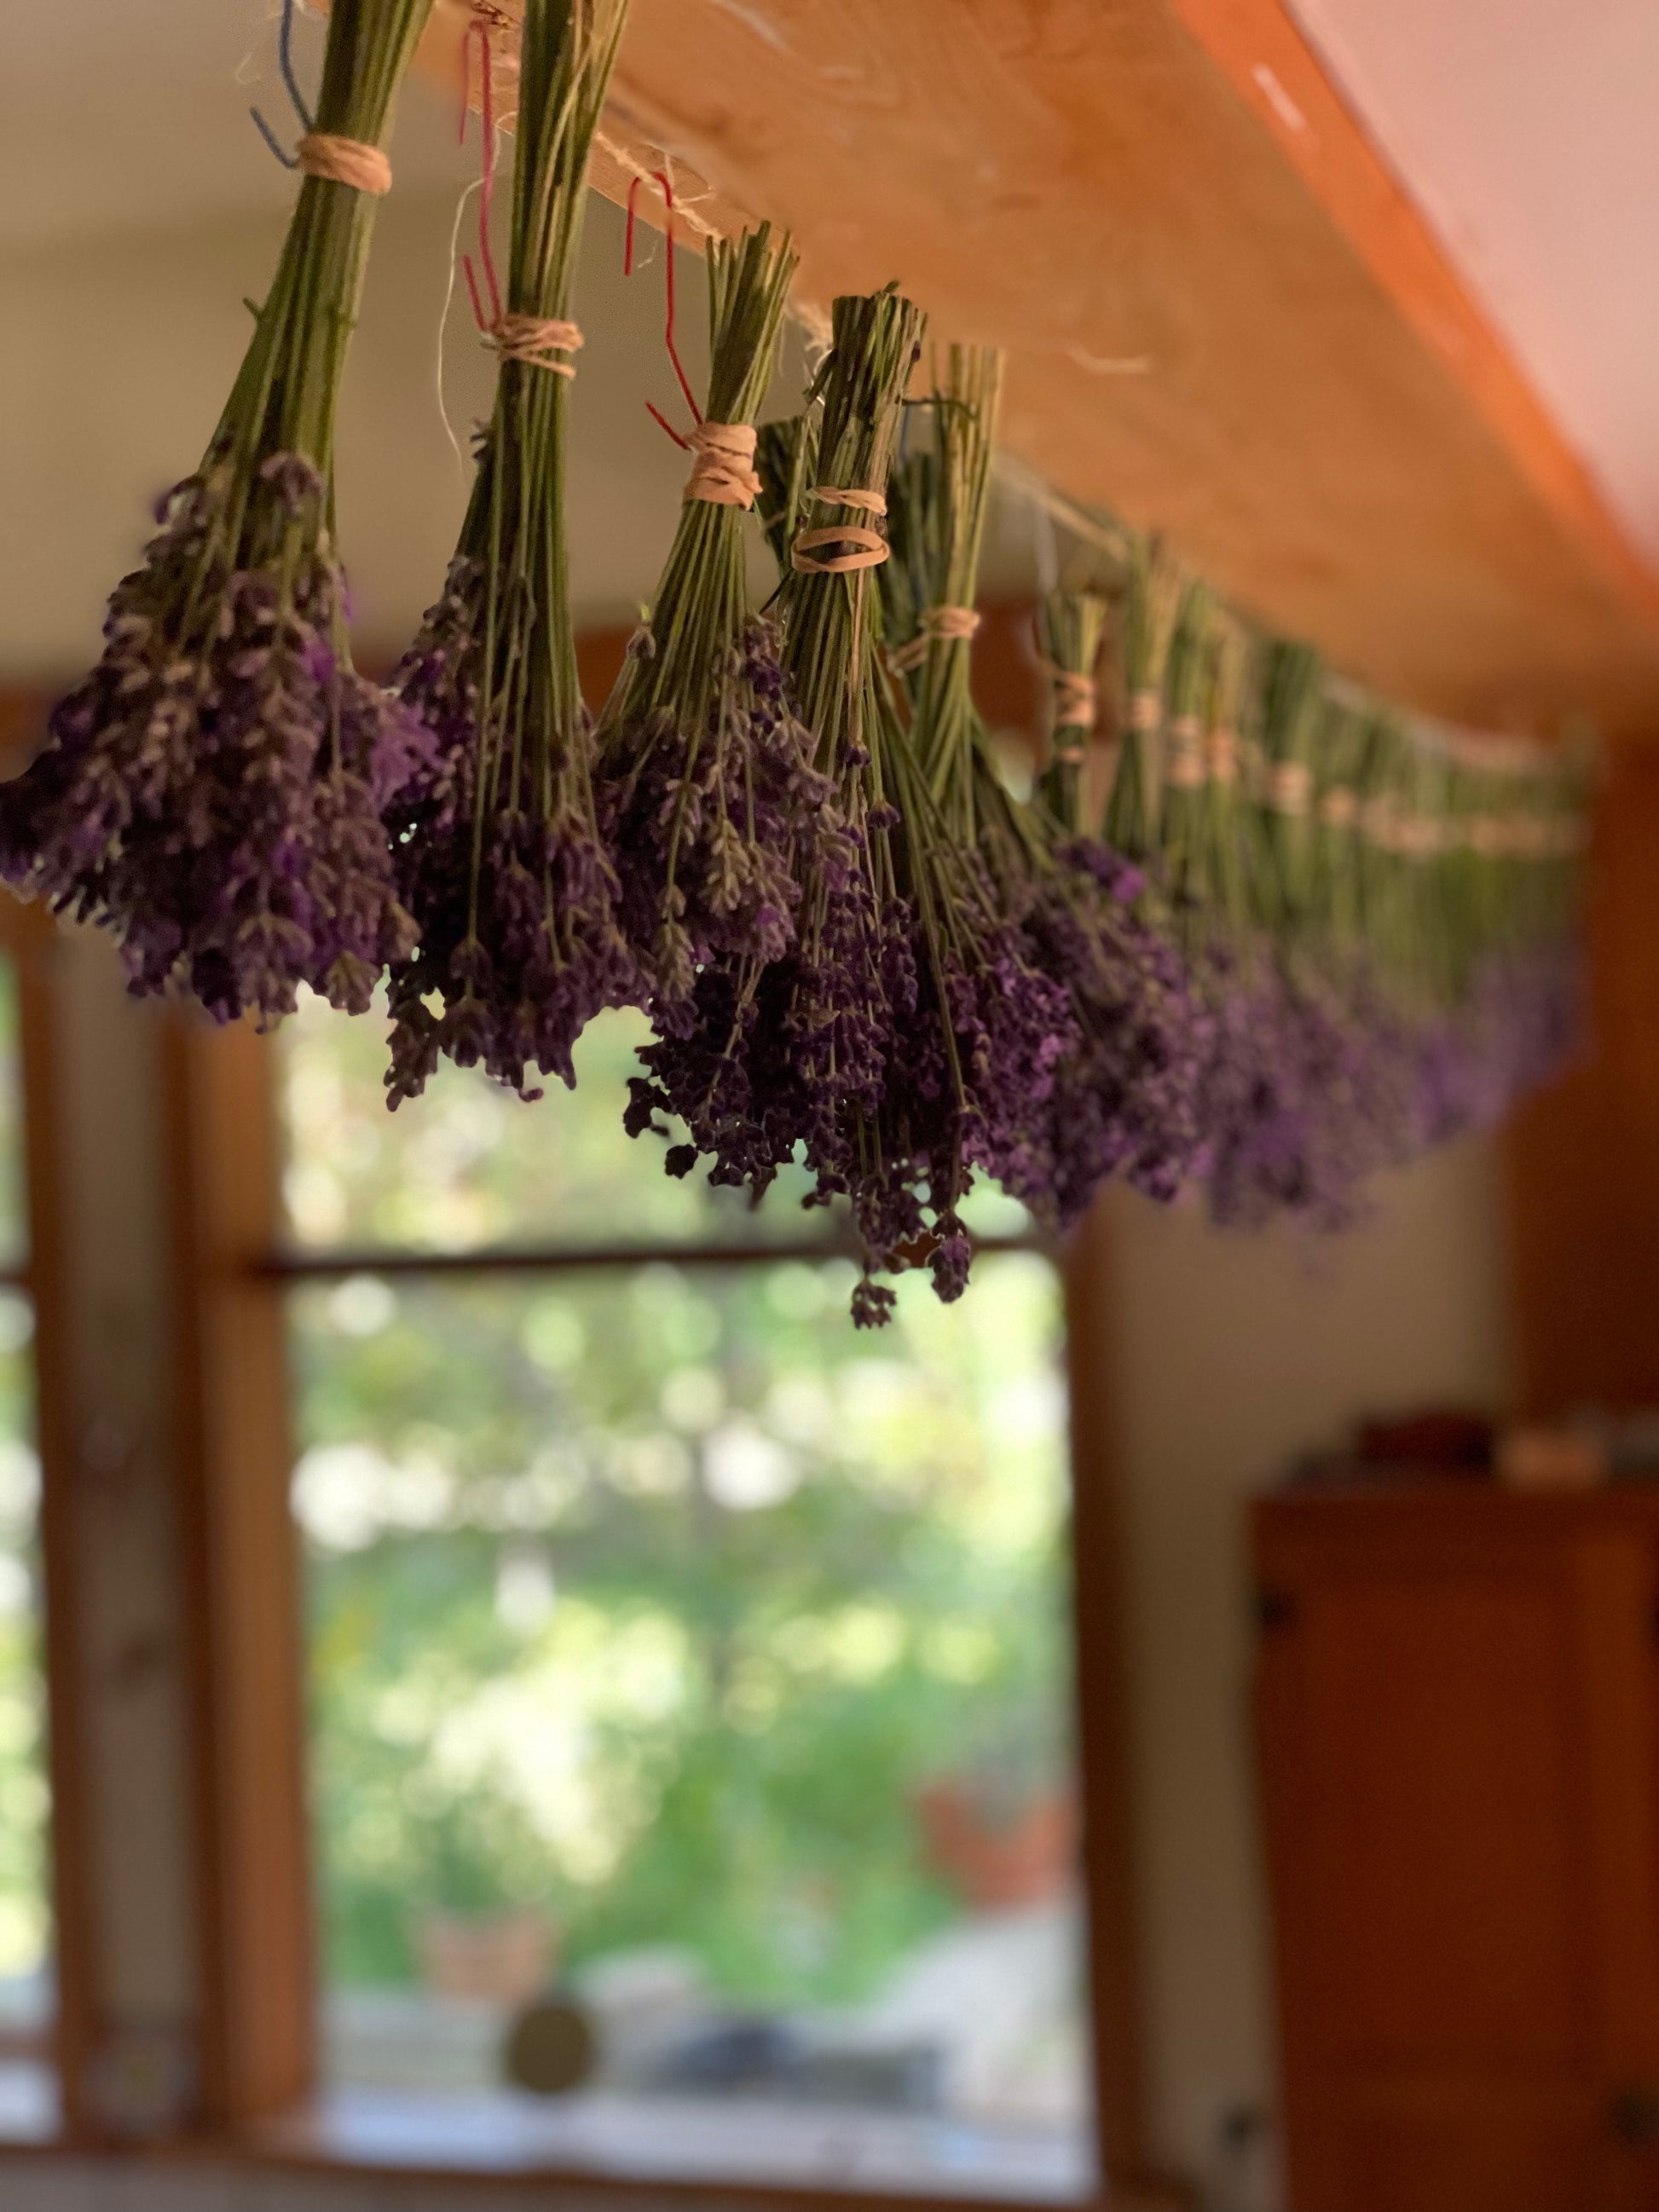 Lavender hanging to dry